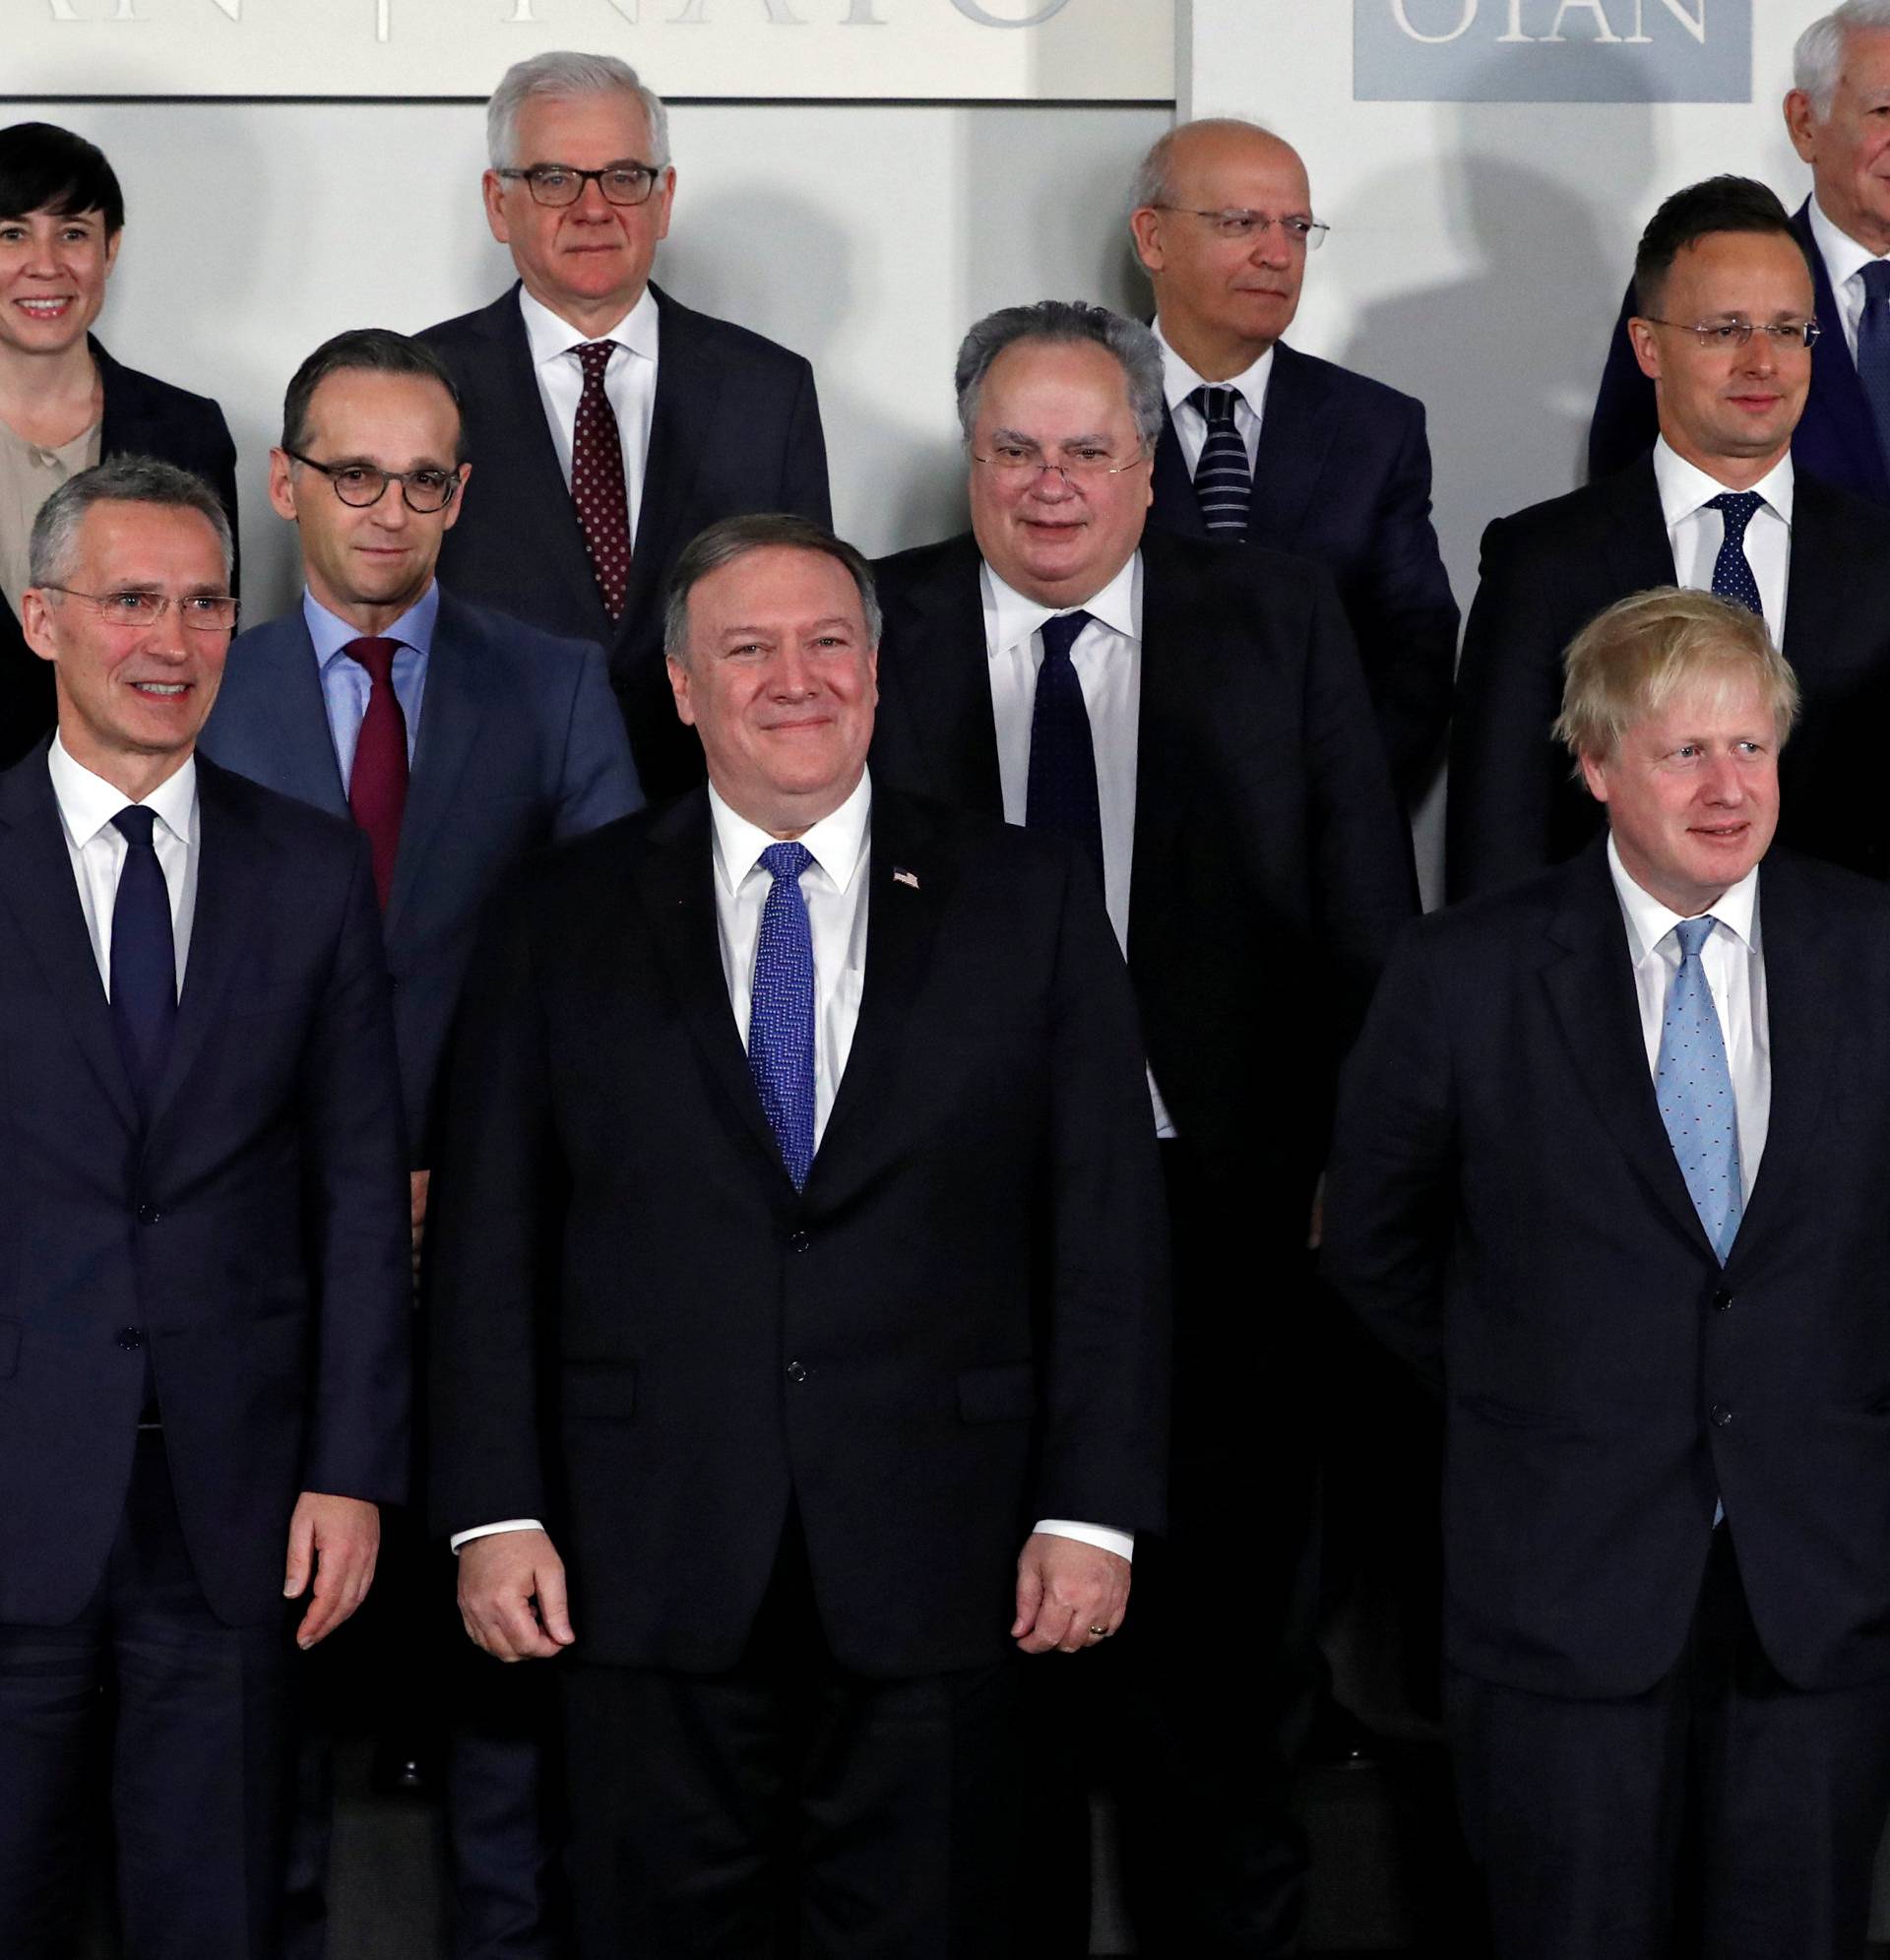 NATO Secretary General Stoltenberg, U.S. Secretary of State Pompeo and Britain's Foreign Secretary Johnson pose for a group photo at a NATO foreign ministers meeting at the Alliance's headquarters in Brussels